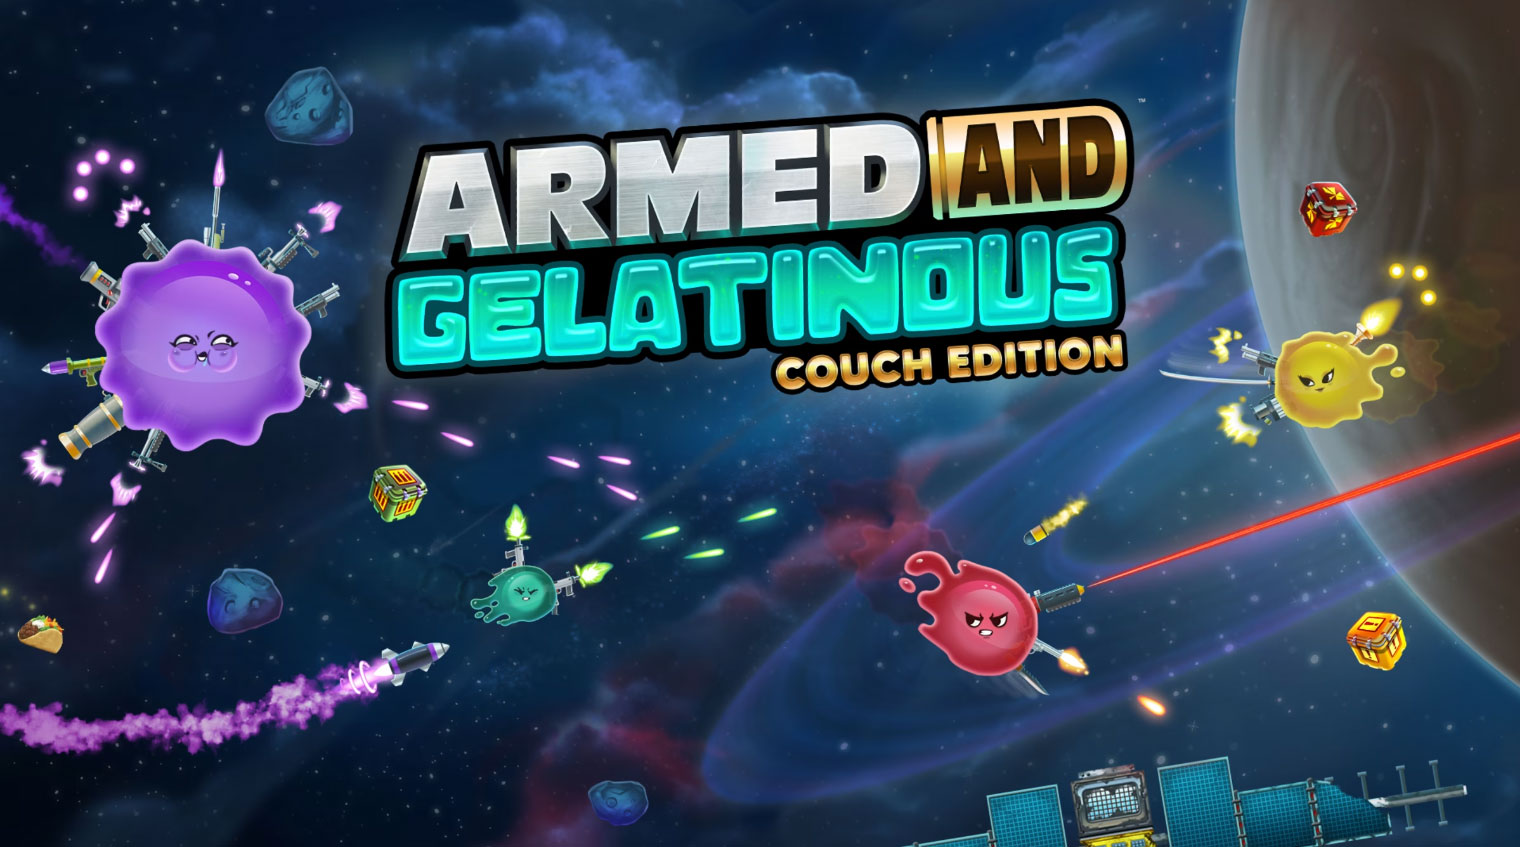 Игра Armed and Gelatinous Couch Edition (трейлер)